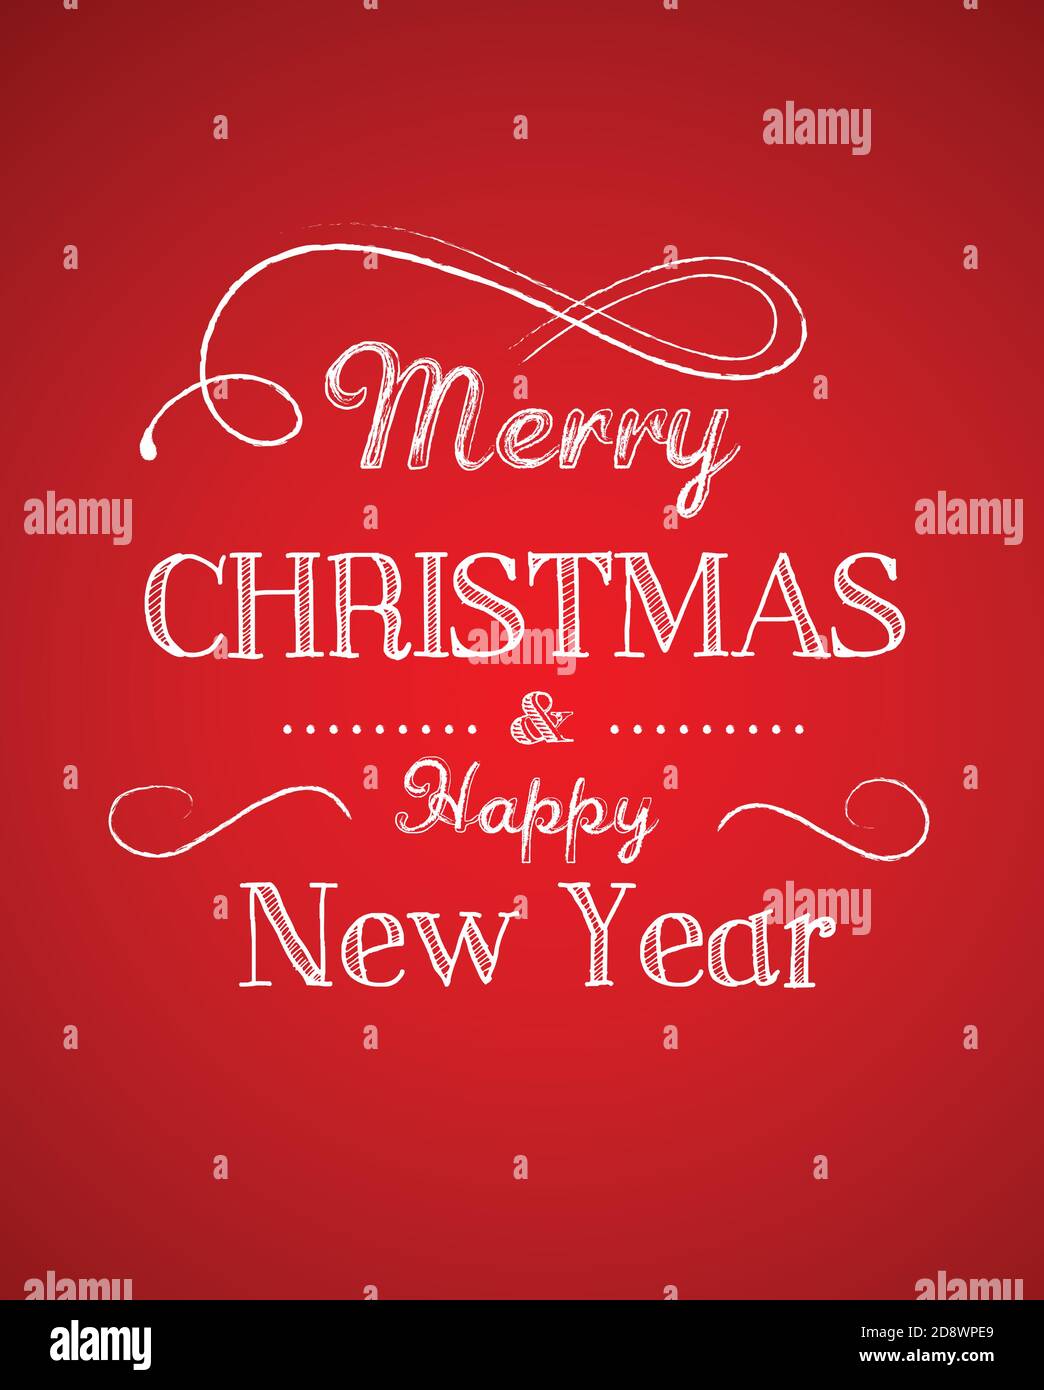 Retro Merry Christmas greeting card template with red background Stock Vector